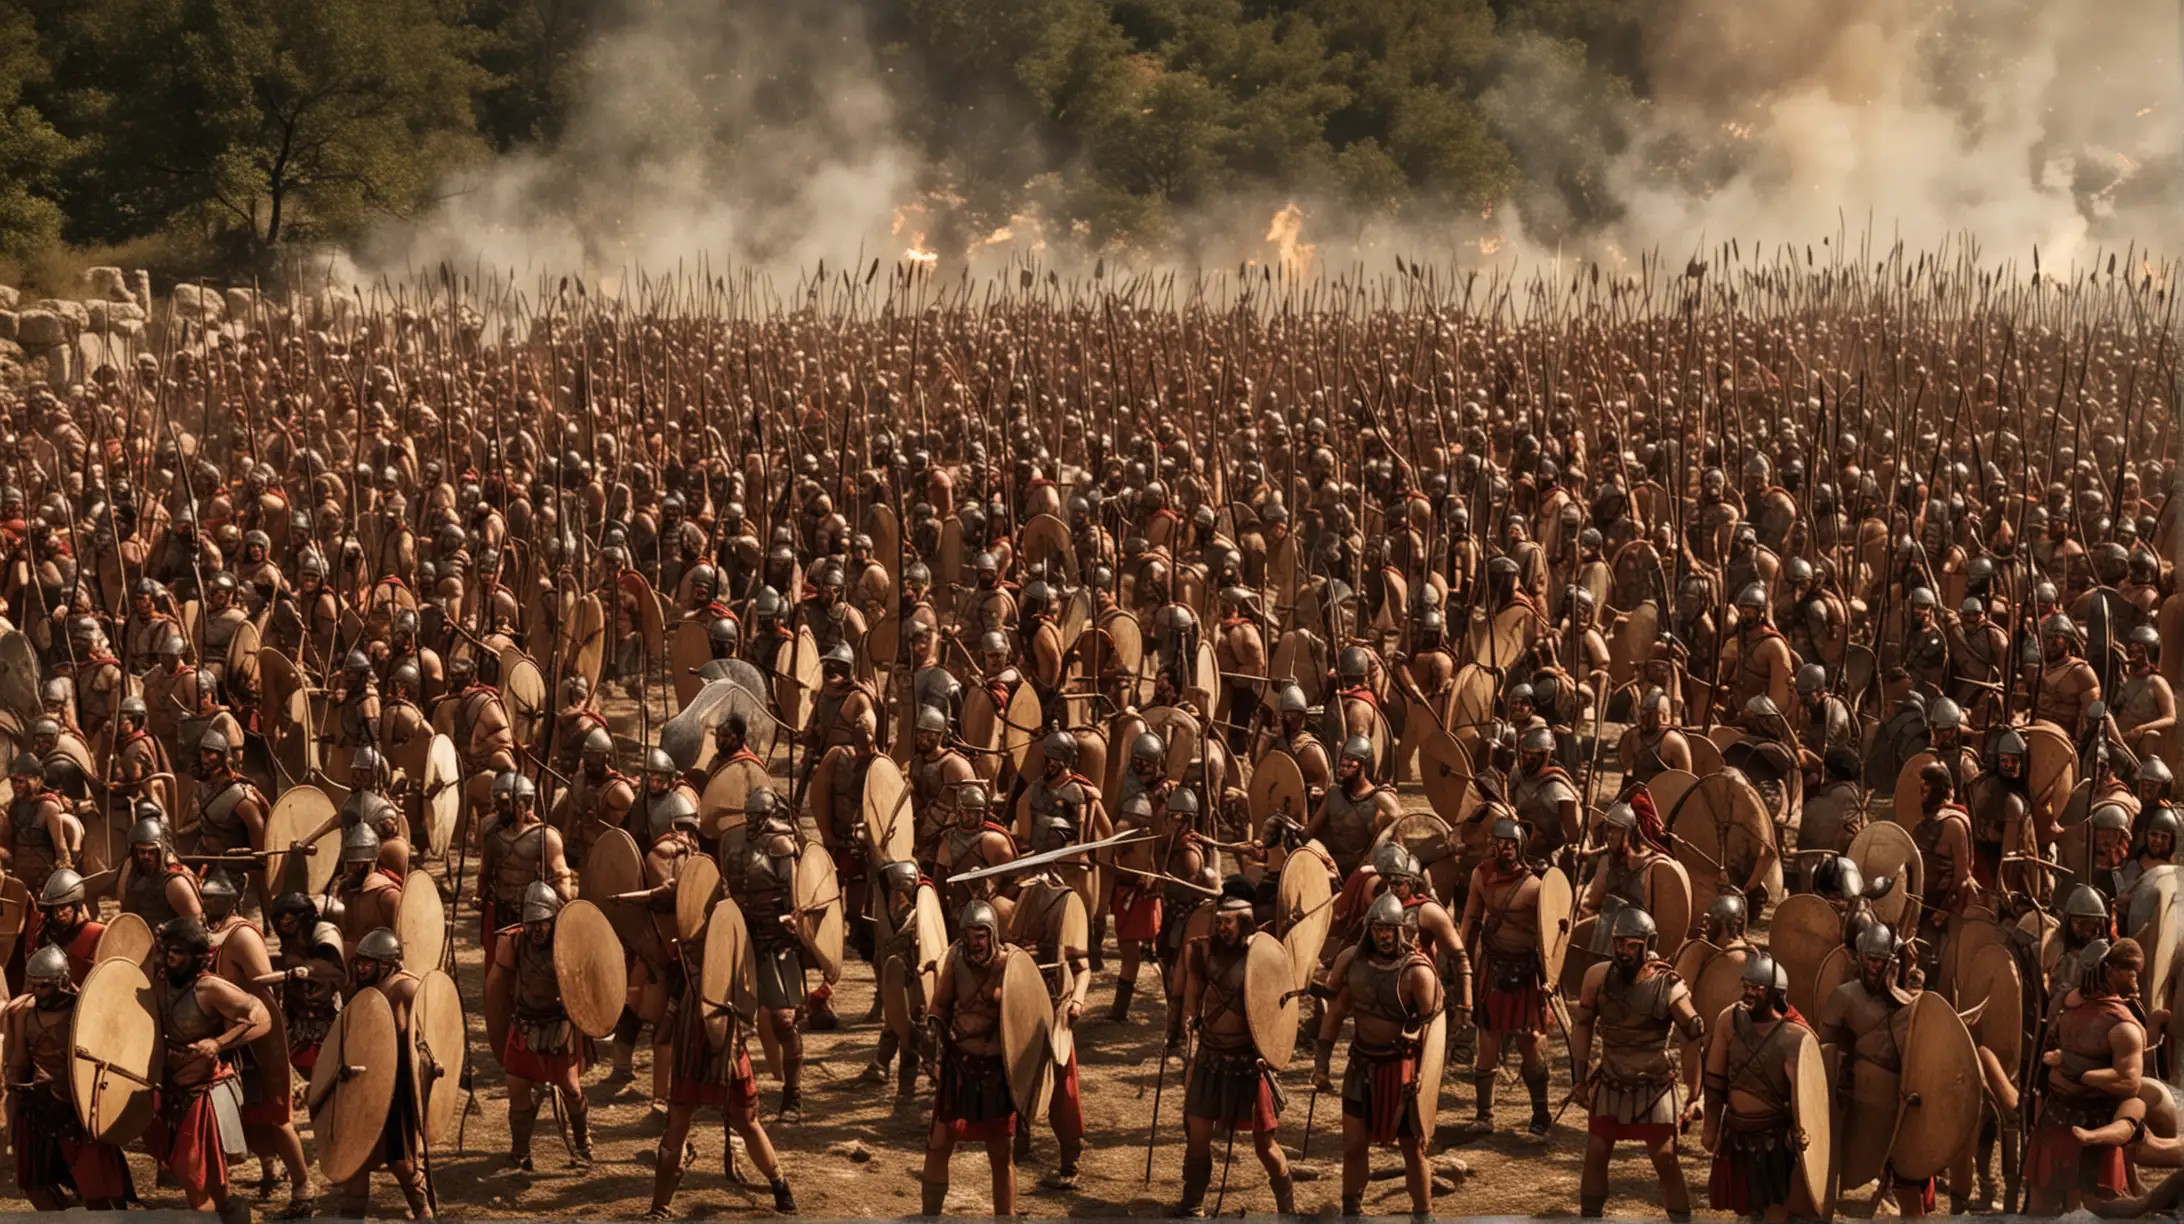  Visualize a dramatic scene of Leónidas y los 300 Guerreros preparándose para la batalla en las Termópilas.

Image Description: The image depicts Leónidas and his 300 warriors standing in formation, clad in their bronze armor and holding their shields and spears. The atmosphere is tense, with a sense of determination and resolve palpable in their expressions. The sun casts long shadows across the rocky terrain as they await the impending Persian invasion.